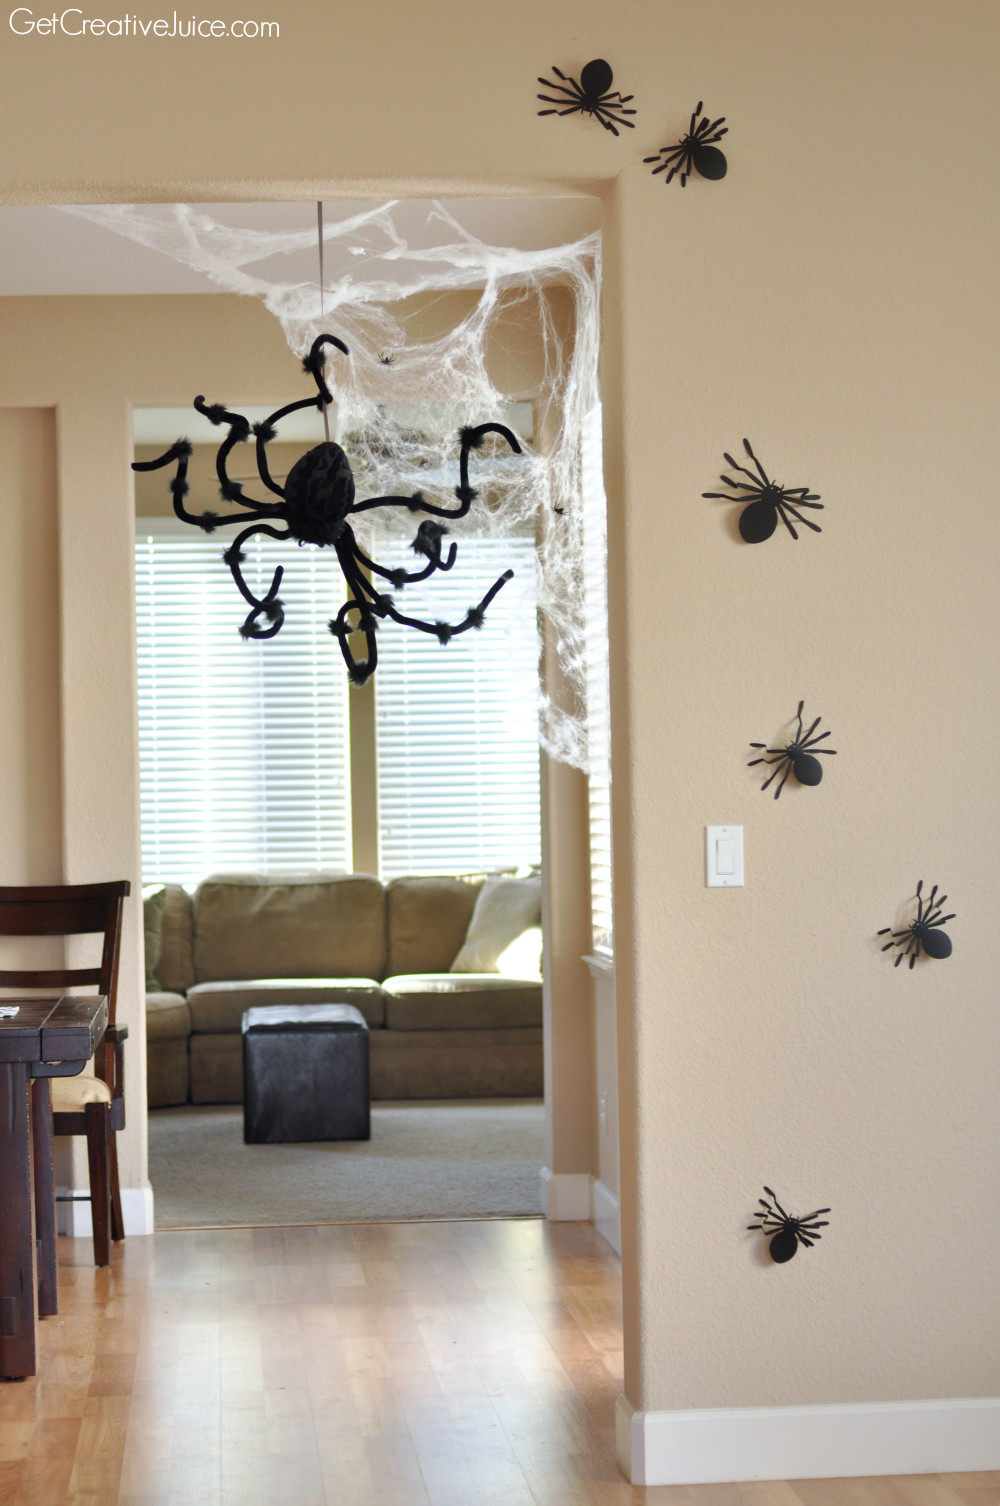 Halloween Wall Decor
 Halloween Decorations Home Tour Quick and Easy Ideas